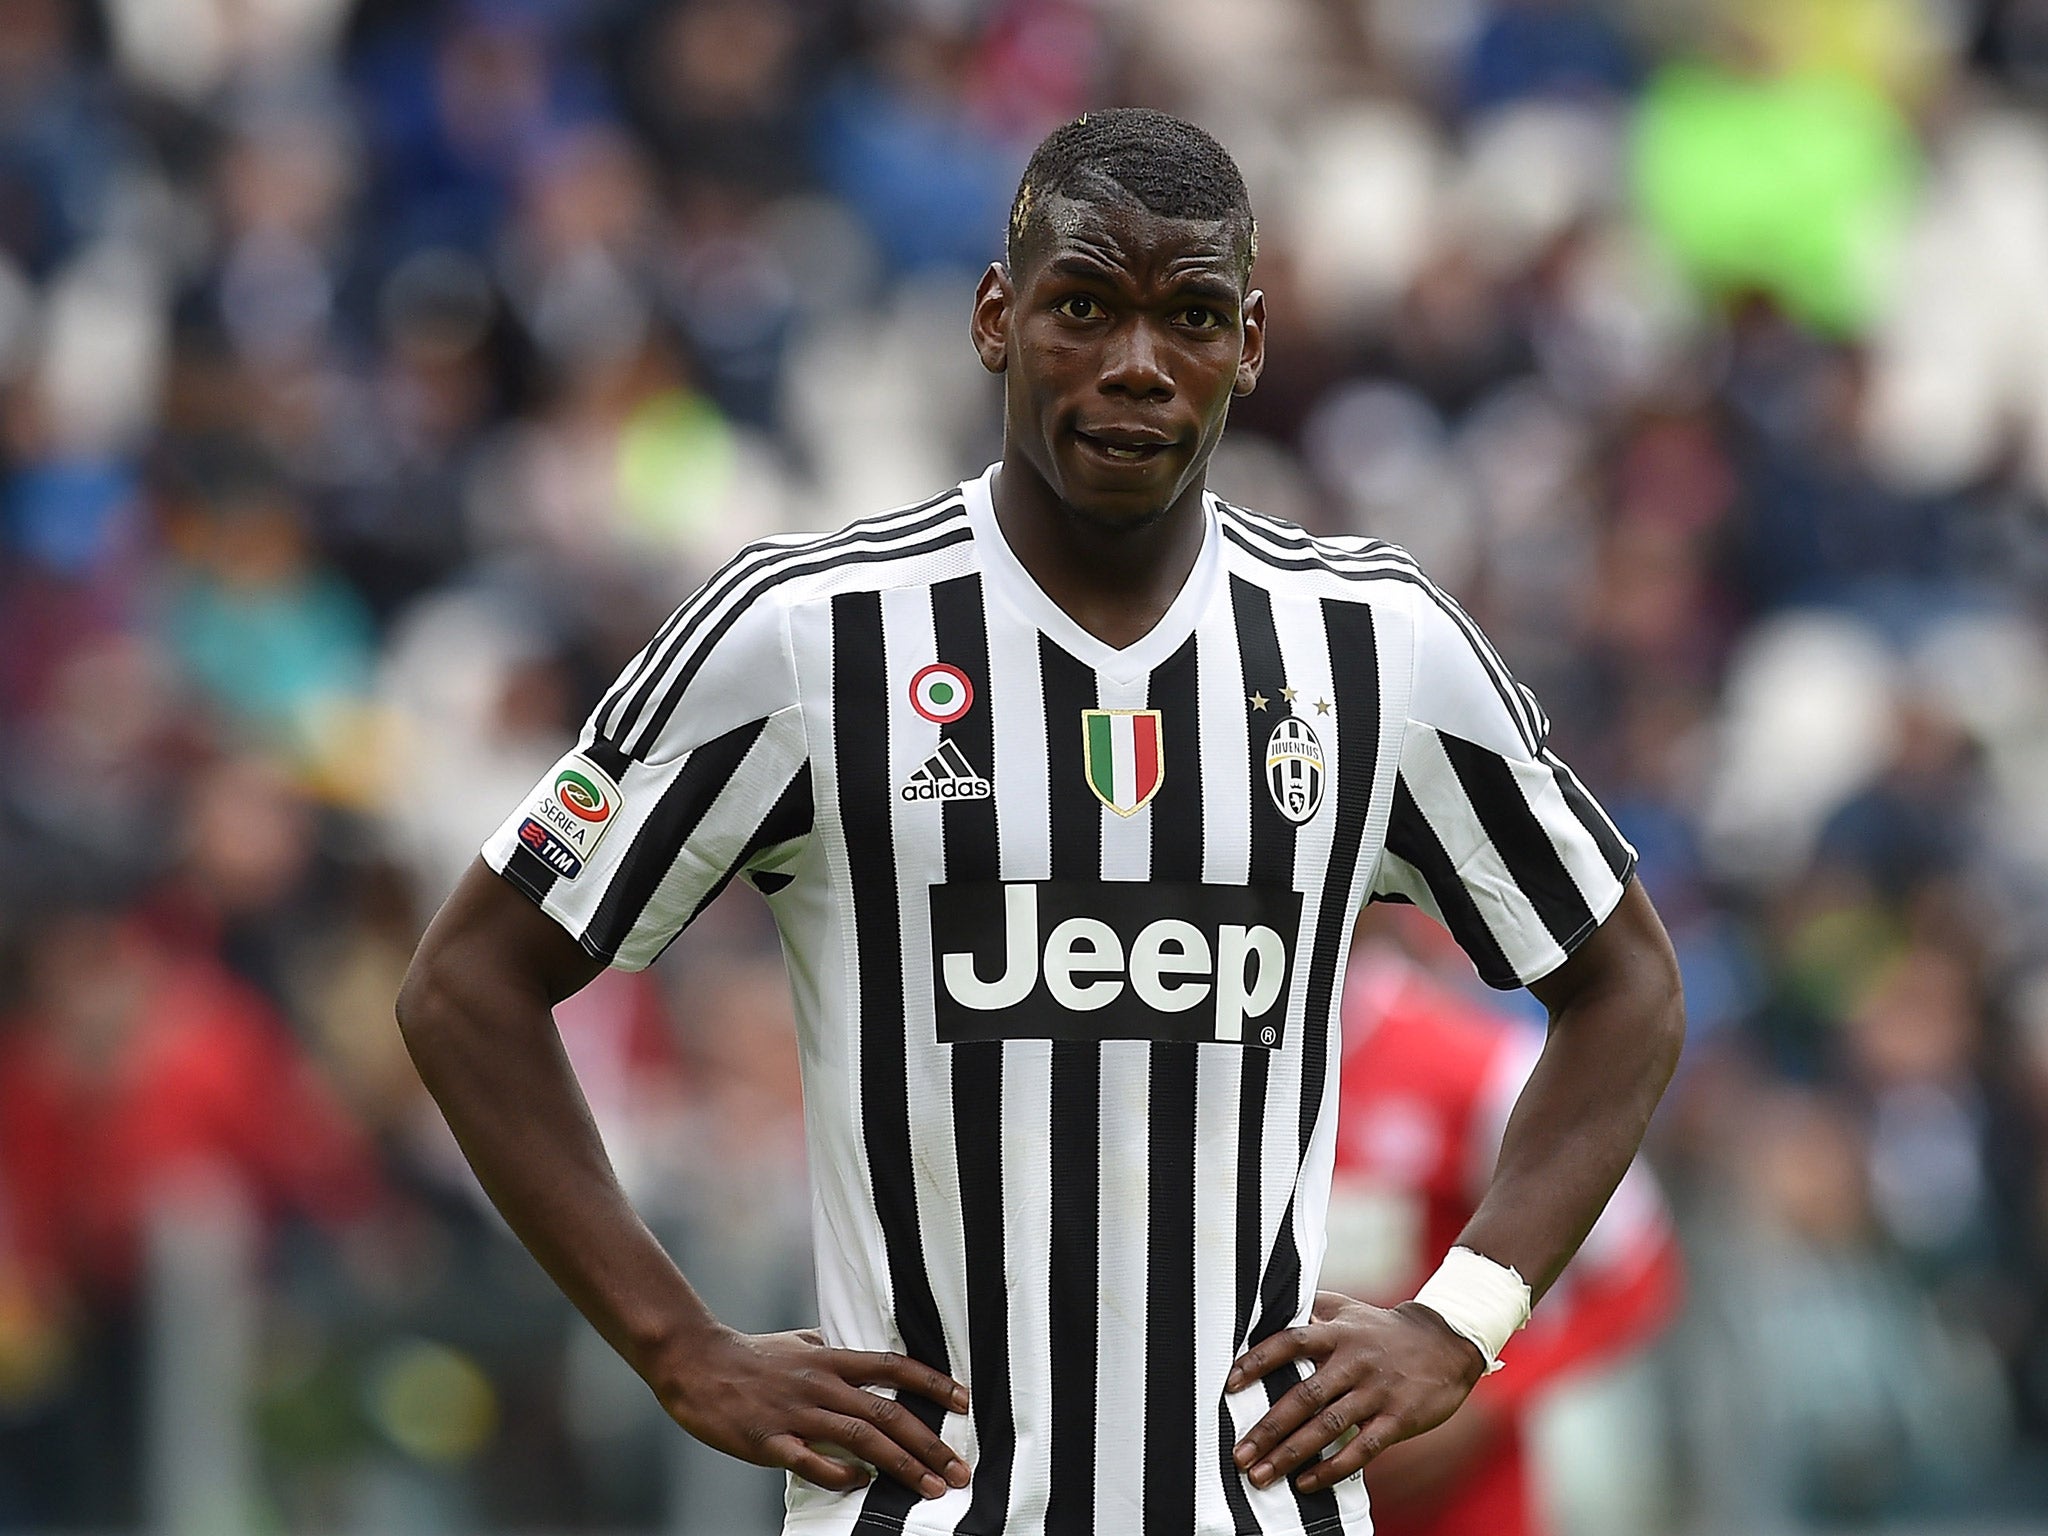 Paul Pogba's agent Mino Raiola says he doesn't care what he moves to Manchester United for if the deal is completed